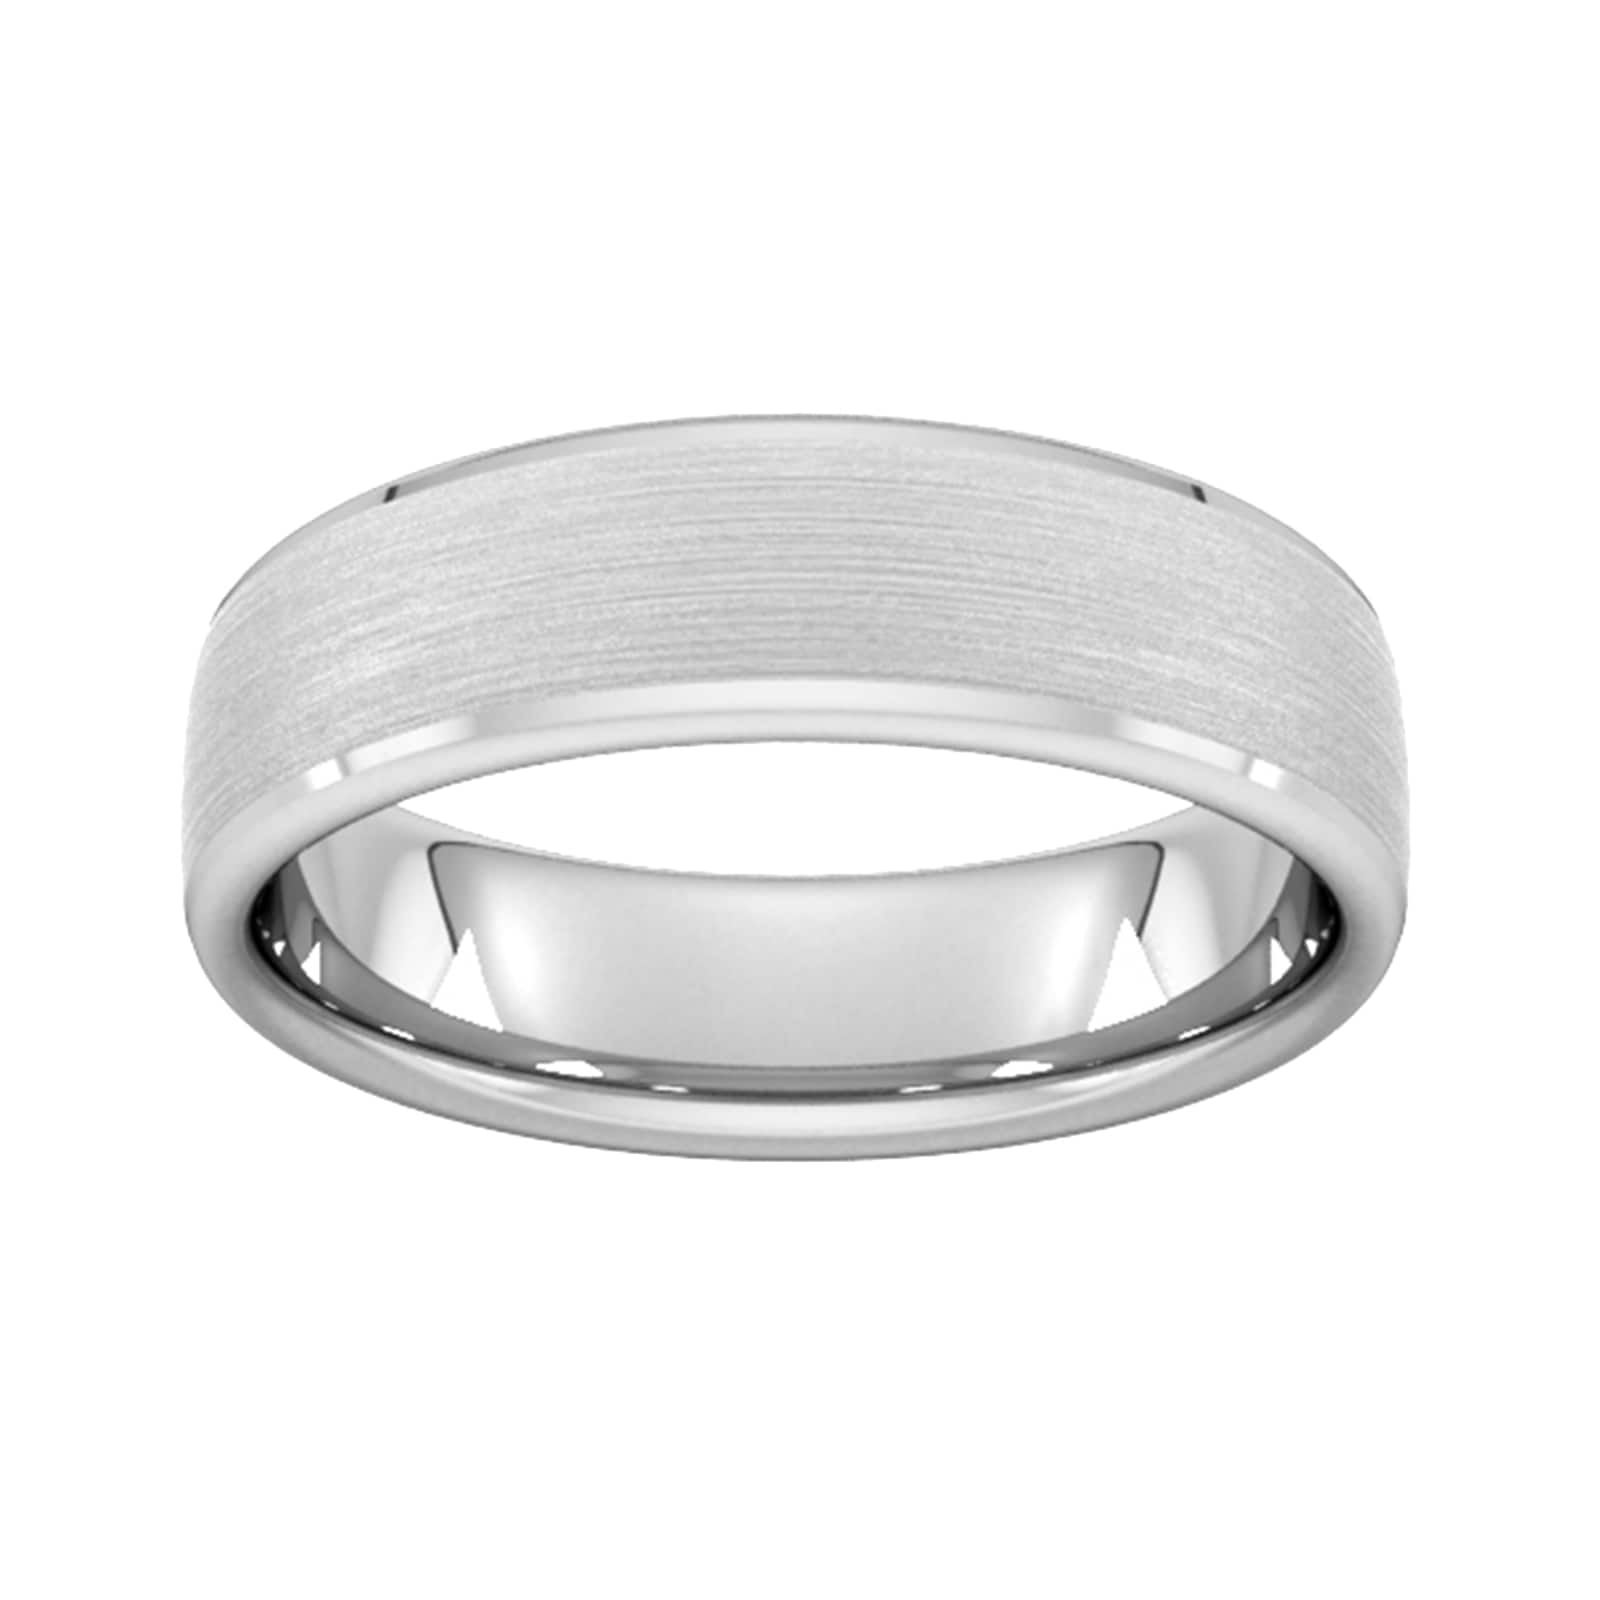 6mm Traditional Court Heavy Polished Chamfered Edges With Matt Centre Wedding Ring In 950 Palladium - Ring Size P